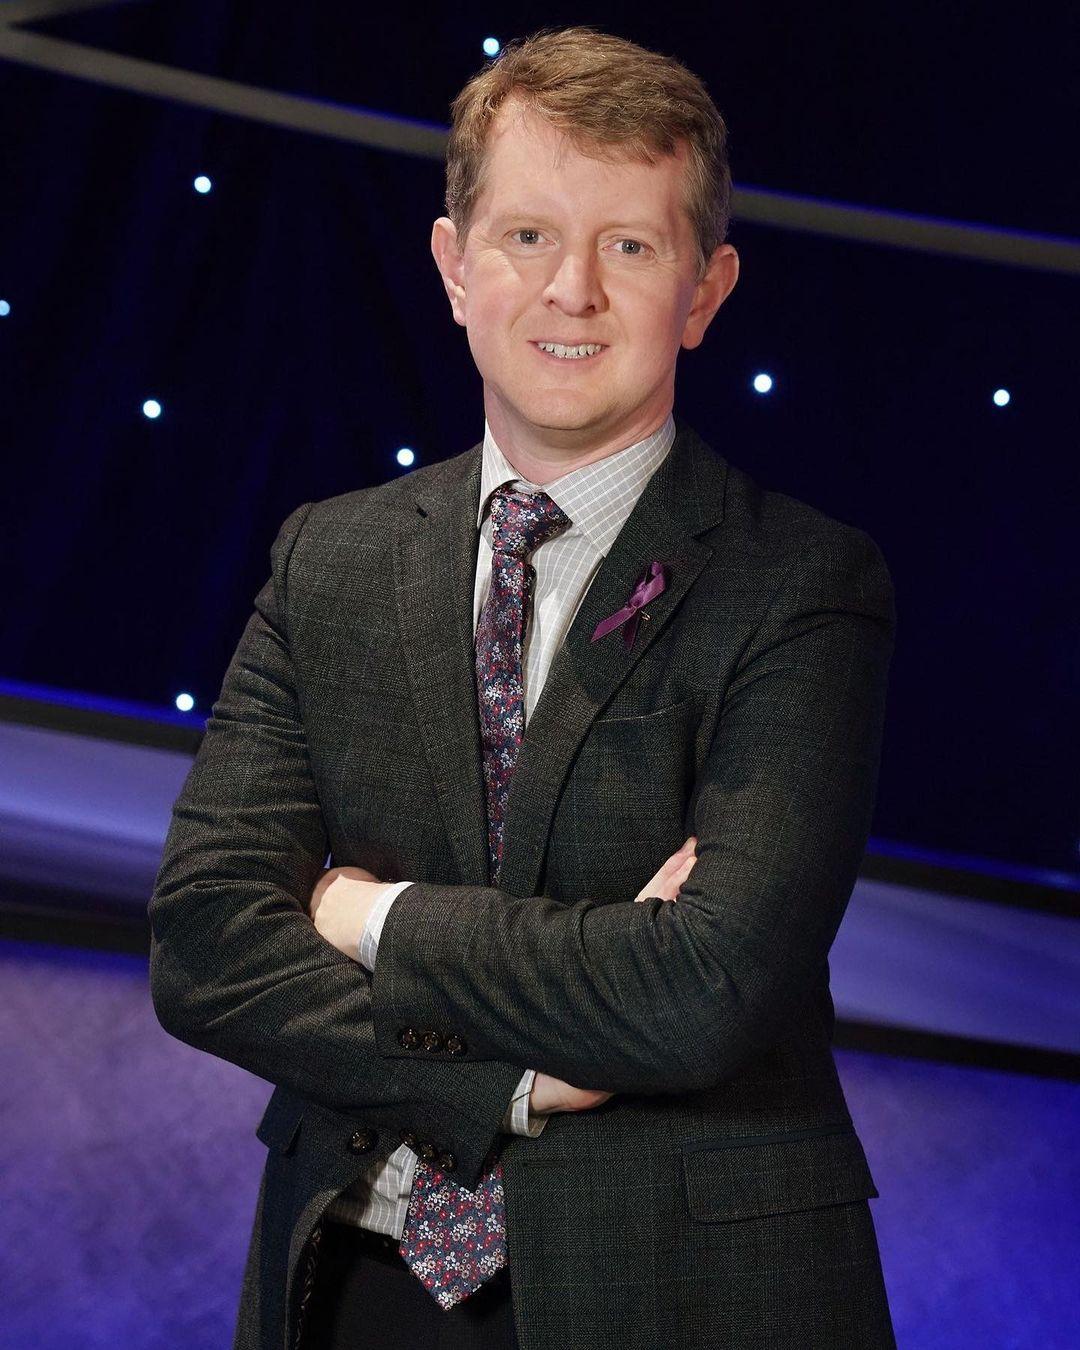 A photo showing Ken Jennings in a black suit and striped tie.